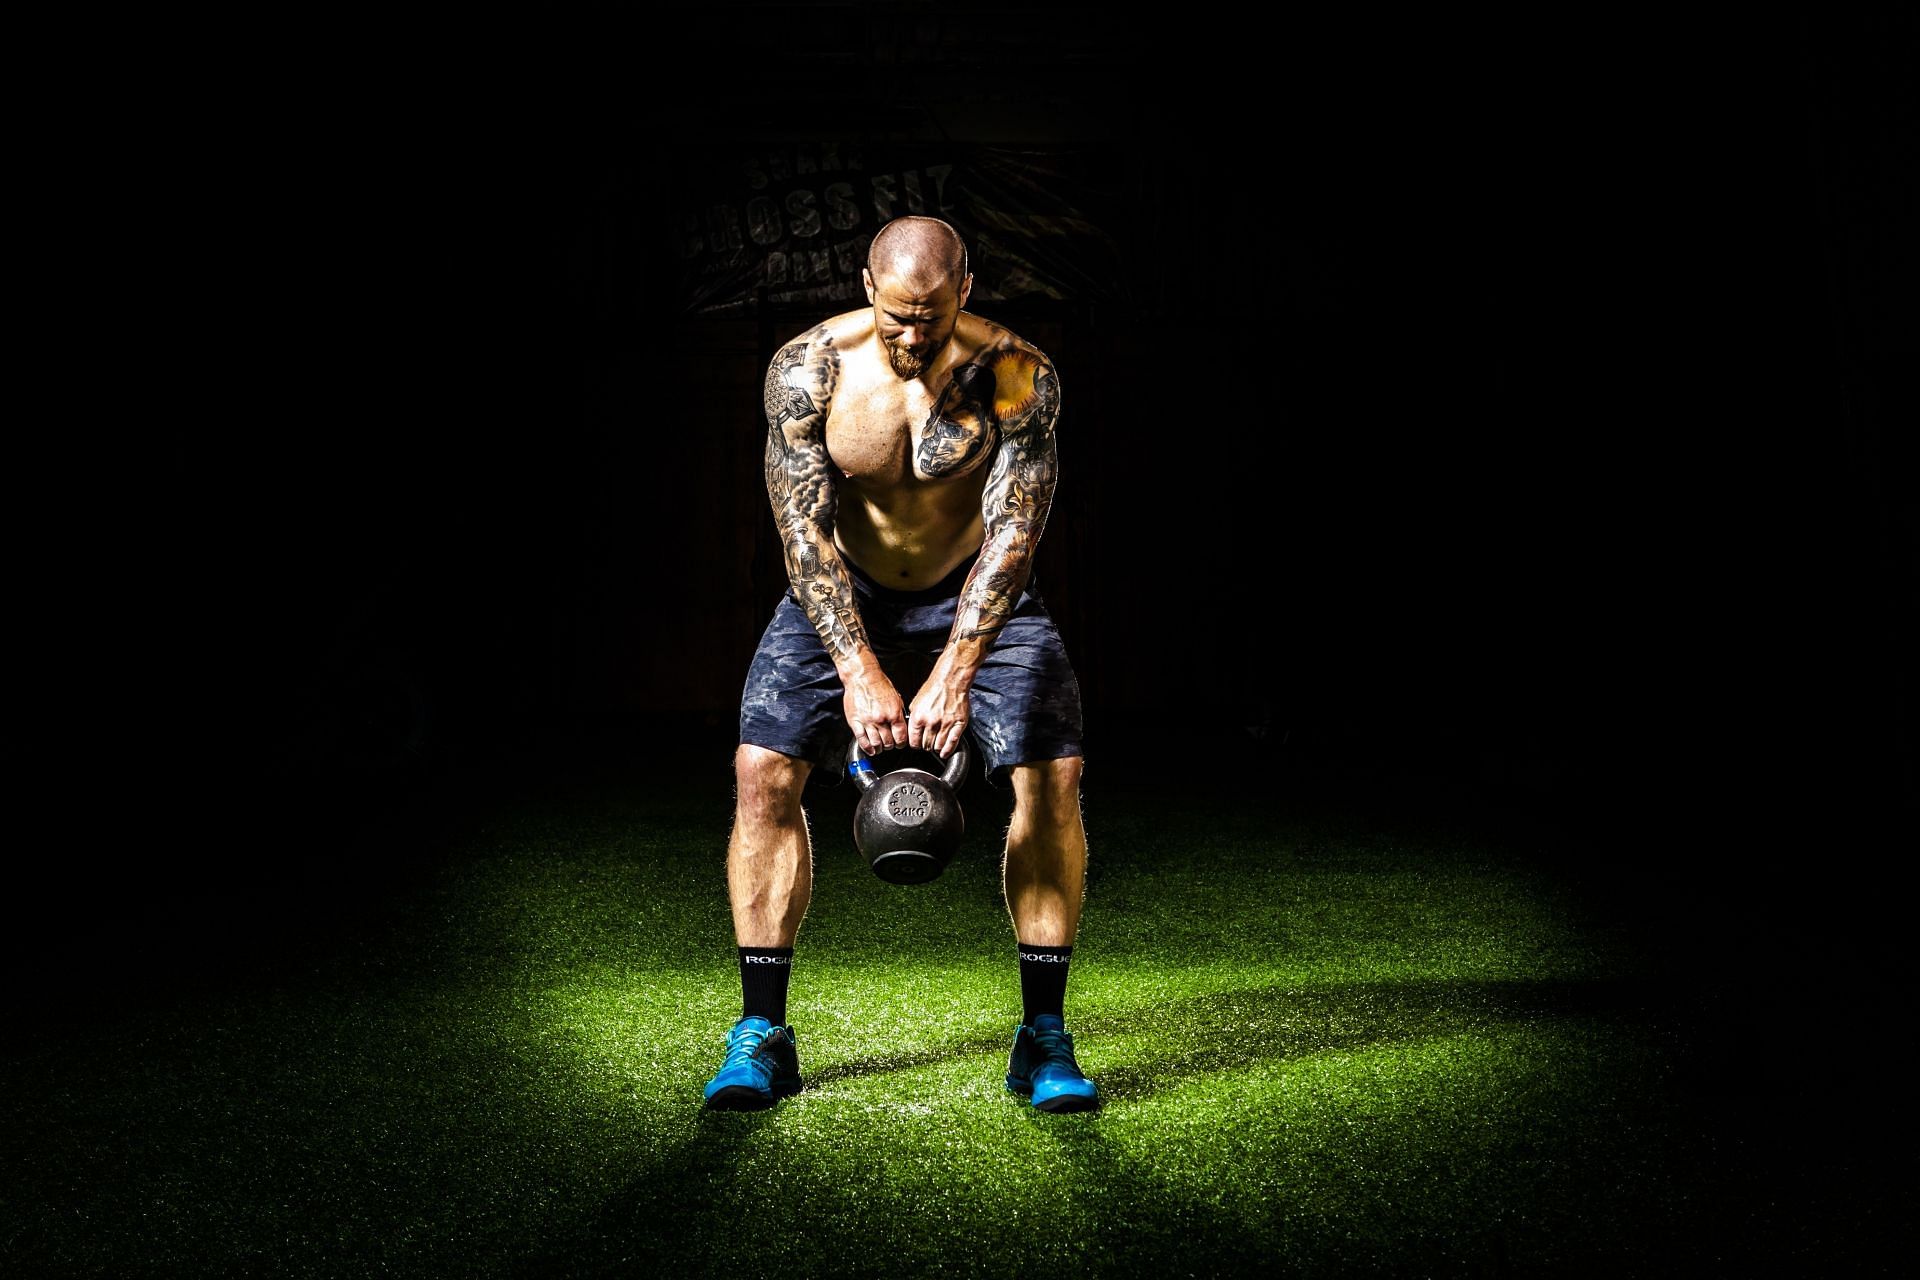 Kettlebell exercises can add an interesting variation to your workout routine (Image via Pexels @Binyamin Mellish)